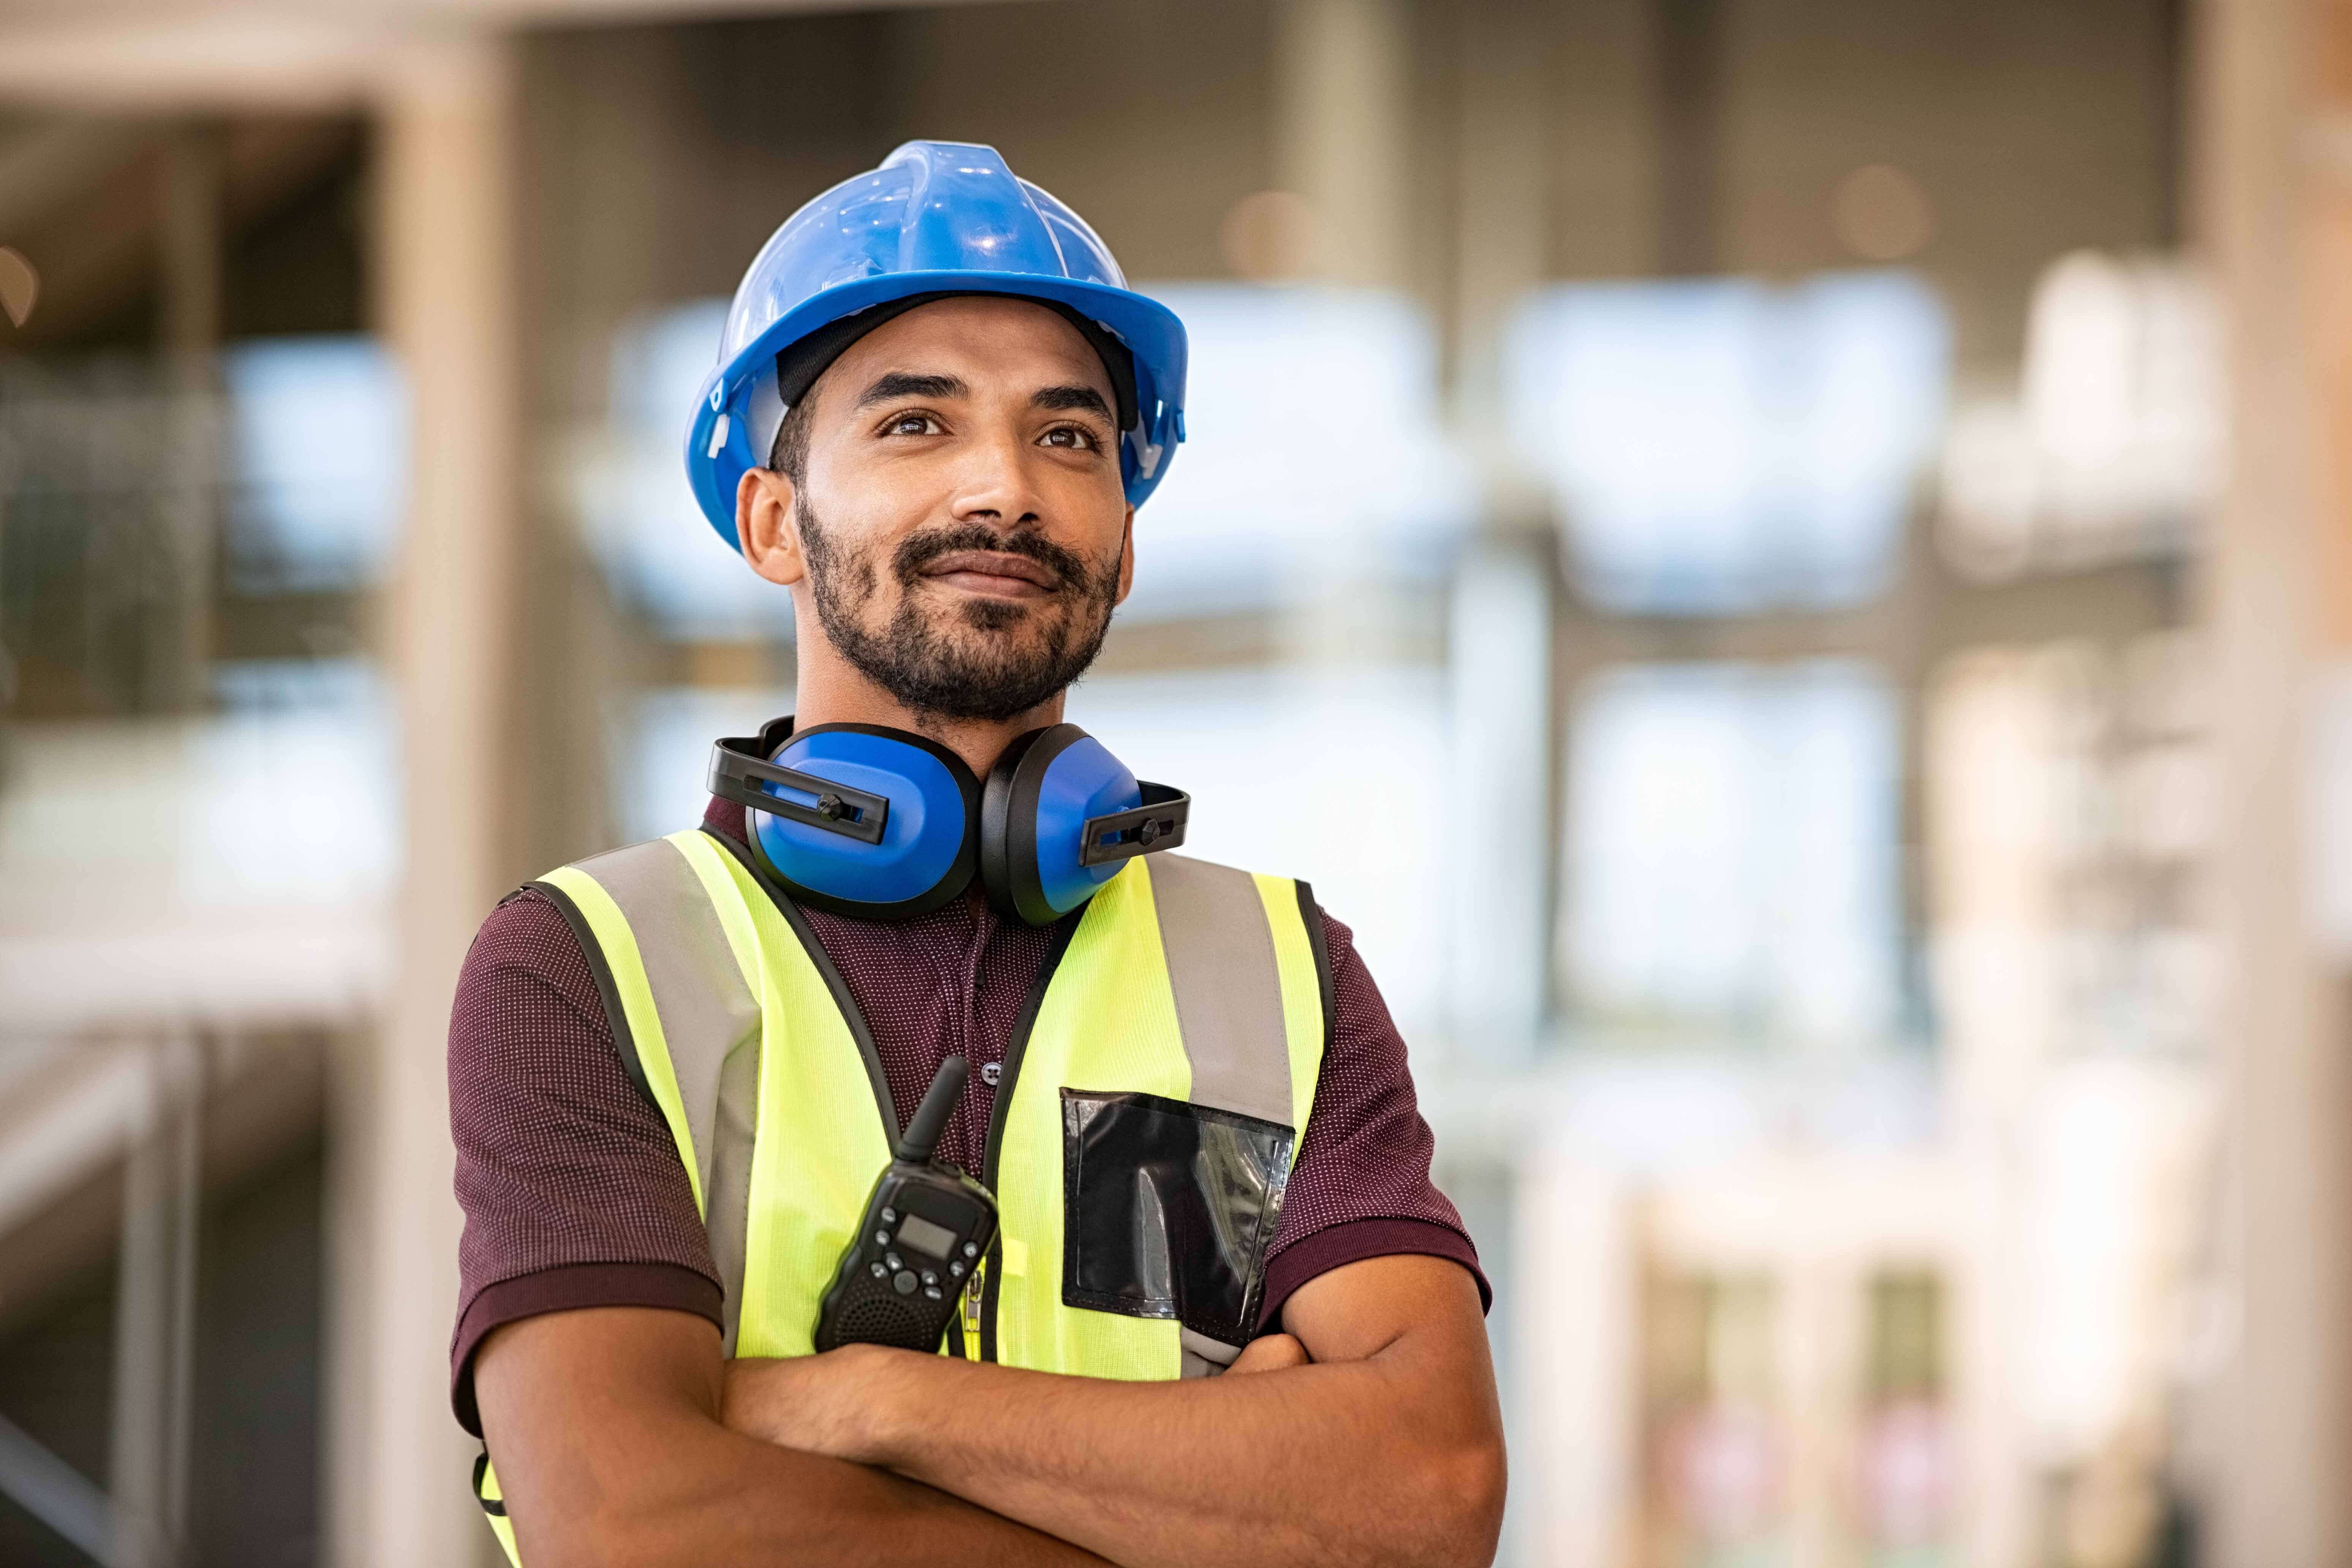 A man smiles and crosses his arms. He is wearing construction gear that implies he is the supervisor.